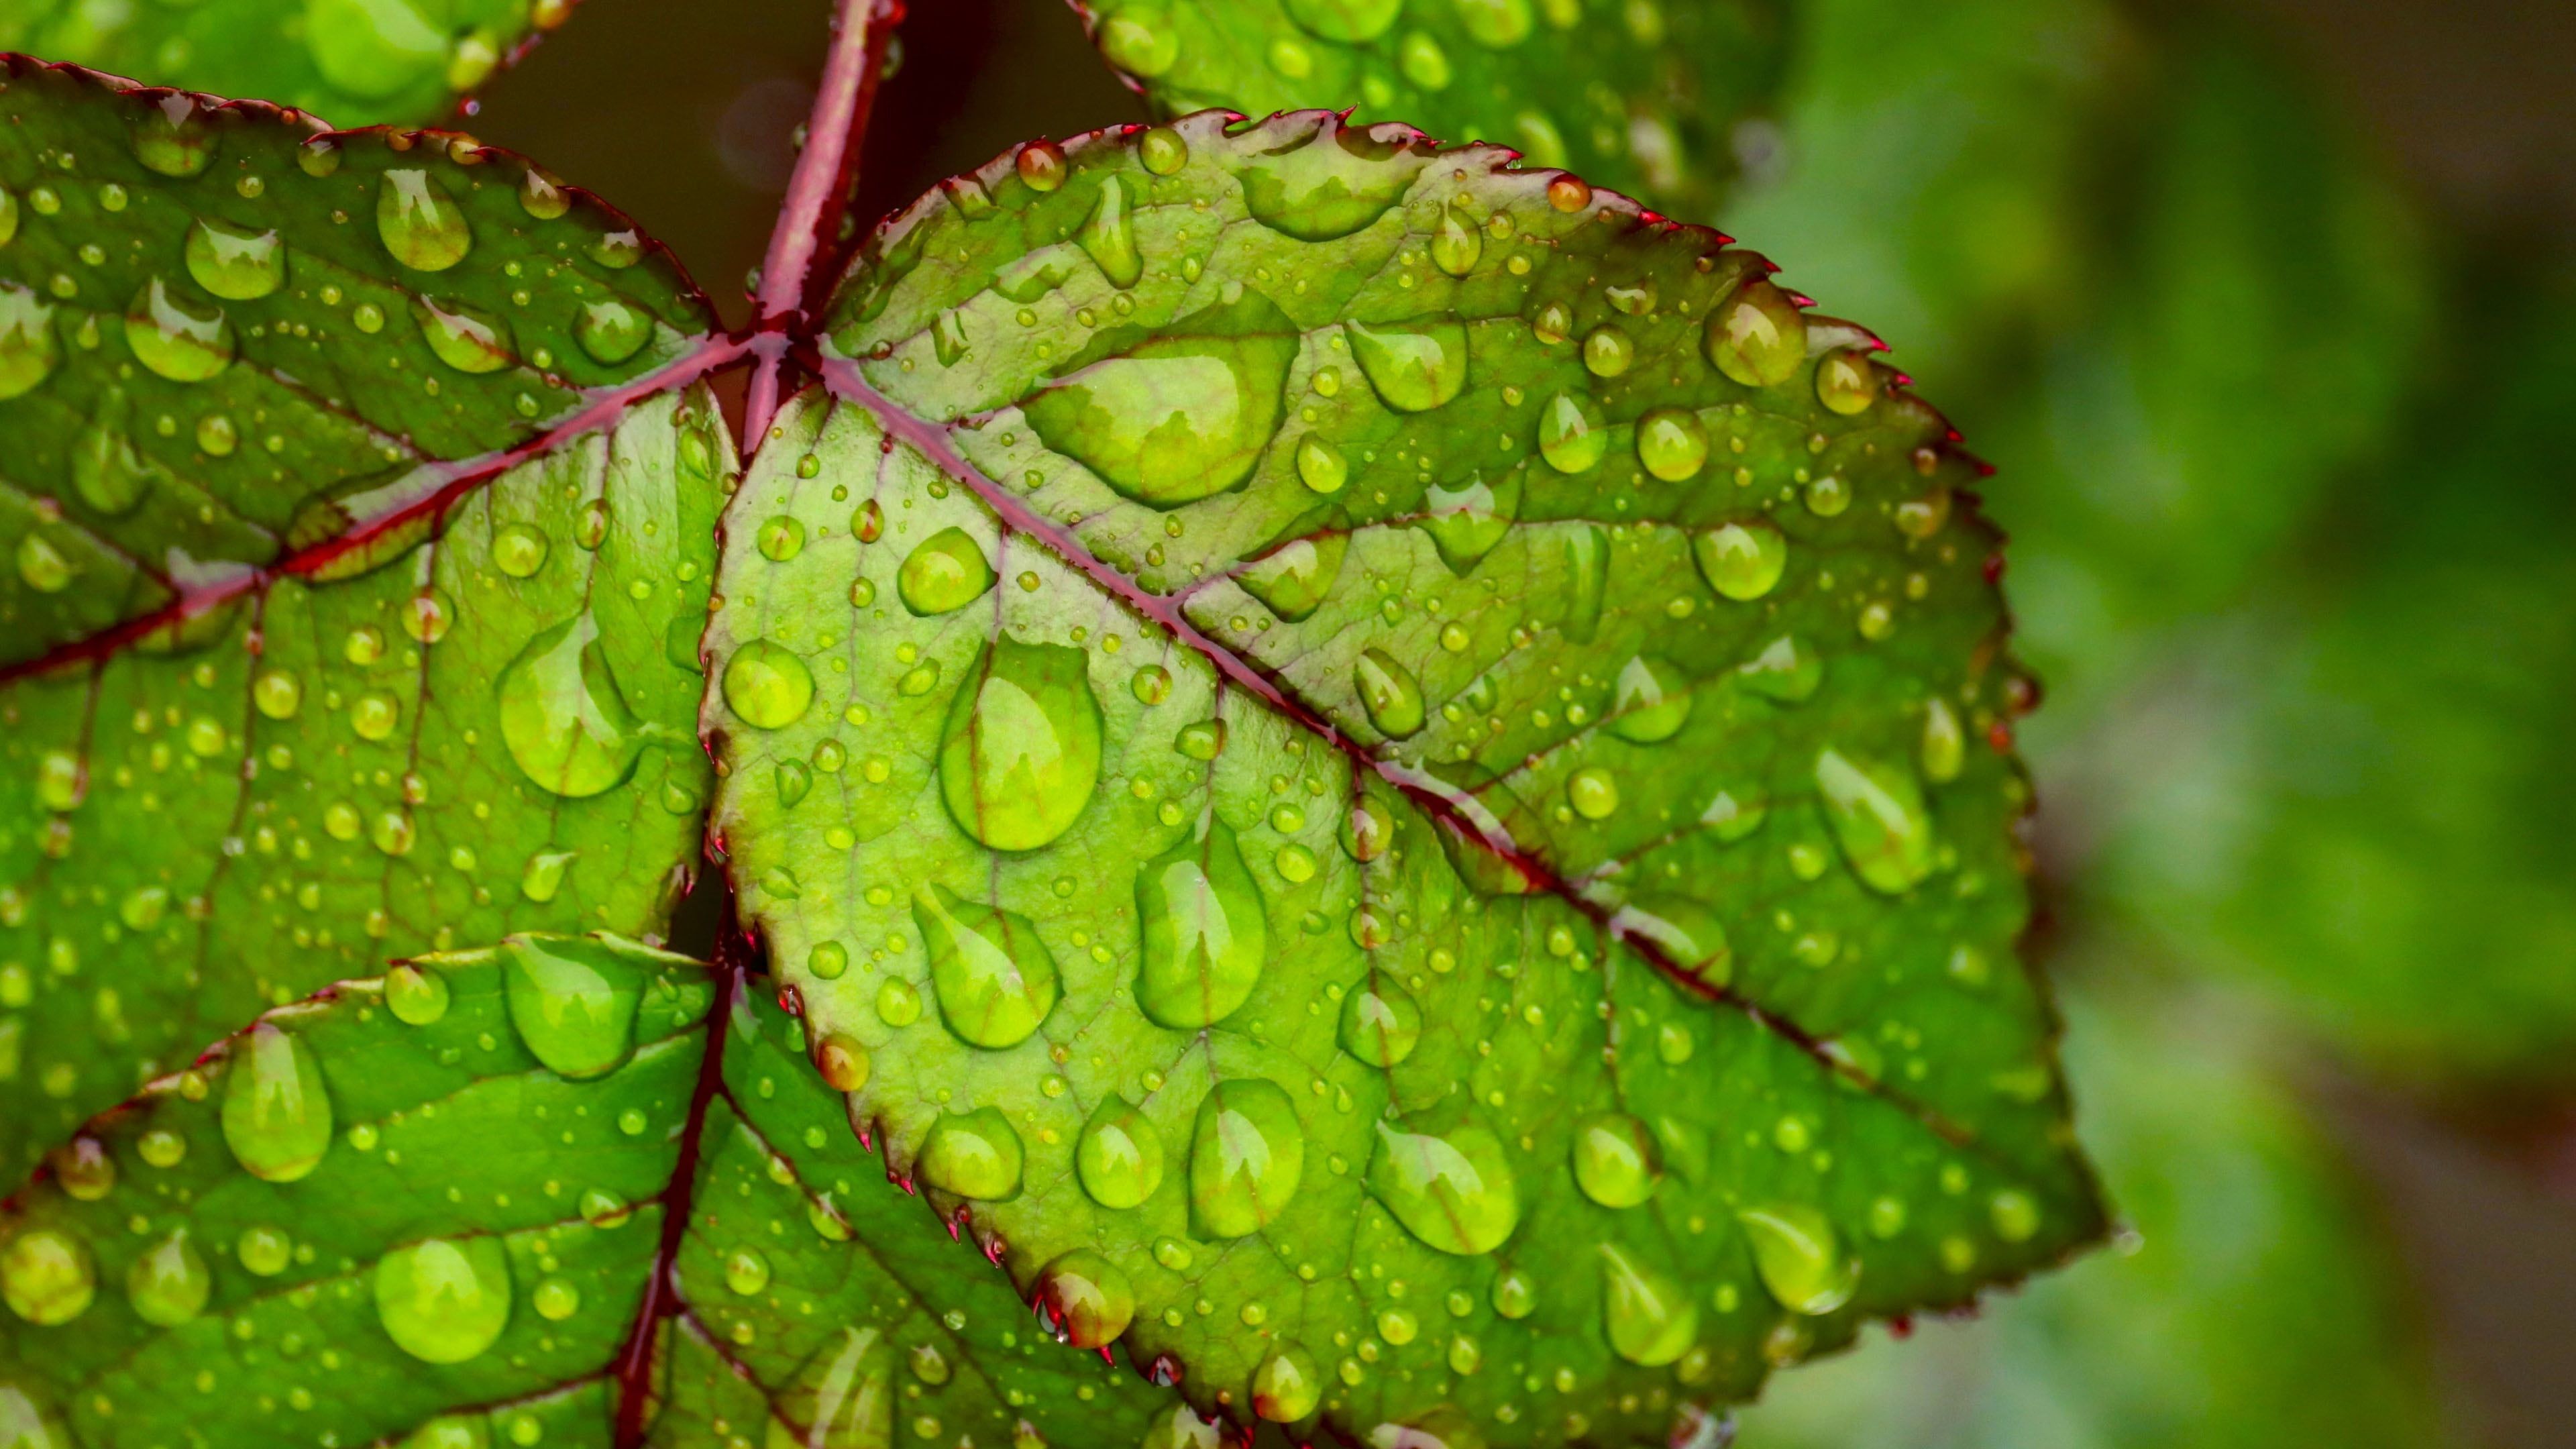 Water droplets on green leaf 4K Ultra HD Wallpaper for Mobile phones Tablet and PC k wallpaper for pc, Wallpaper for mobile phones, HD wallpaper for mobile